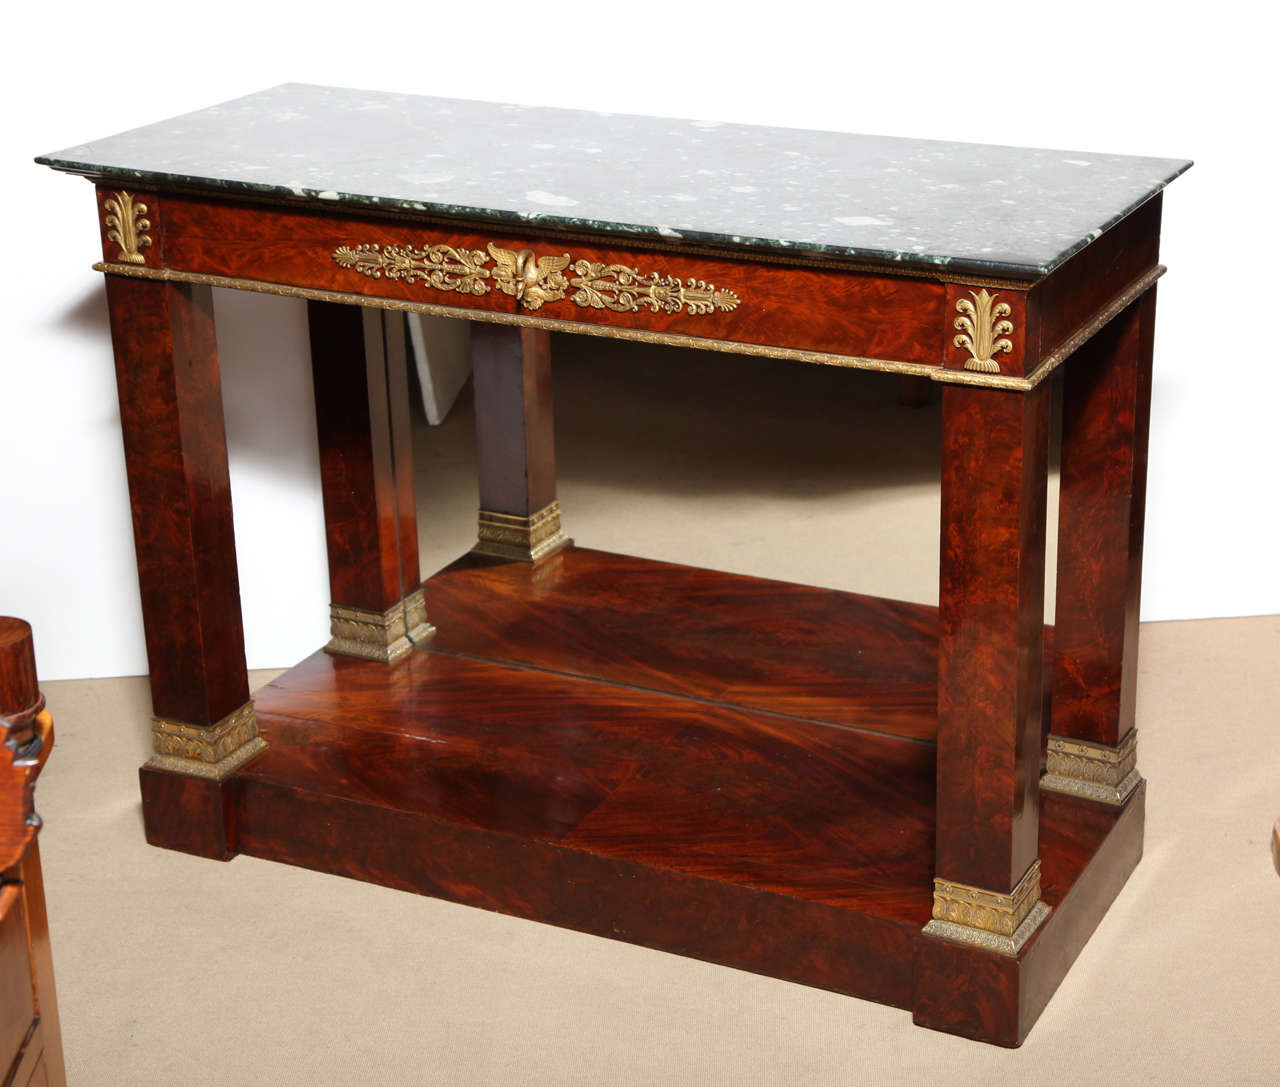 Early 19th Century French Empire,Mahogany,Ormolu Mounted, Neo-Classical, Marble Top Console, possibly having had a back splash, Ex Collection of the Guinness Family
The rectangular Verde Antico marble top with undercut edge over a single apron